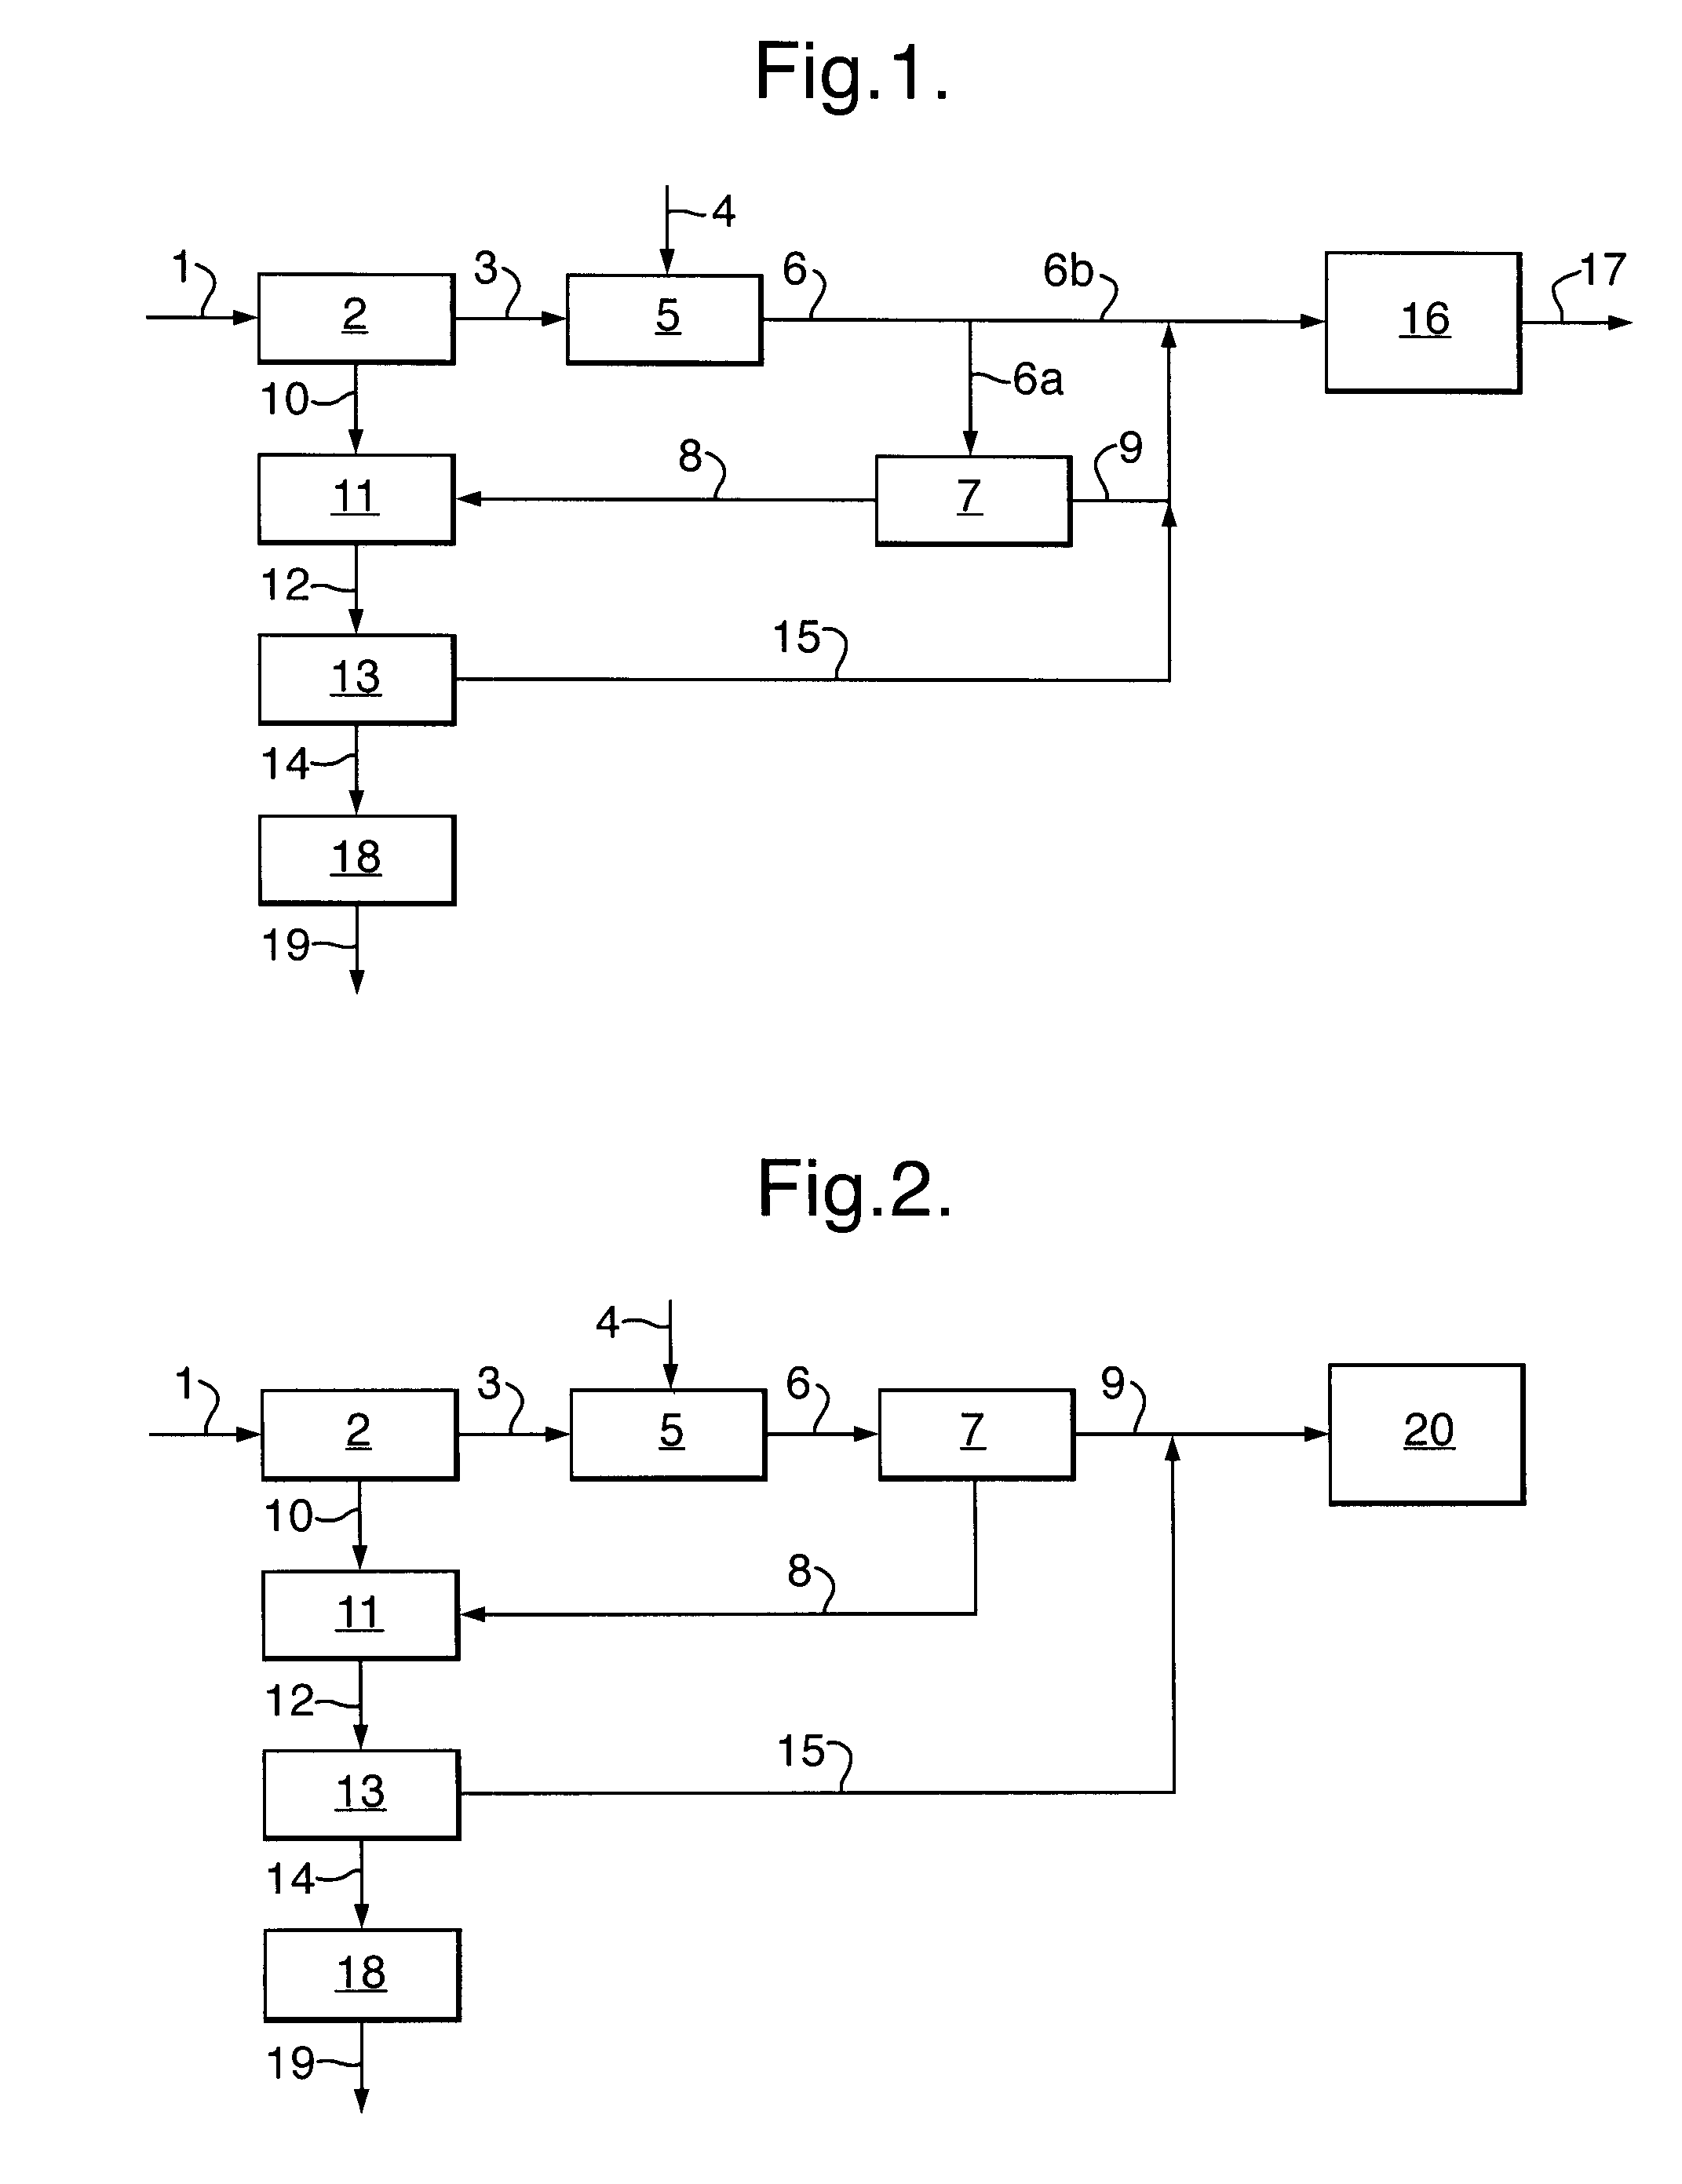 Process for the manufacture of carbon disulphide